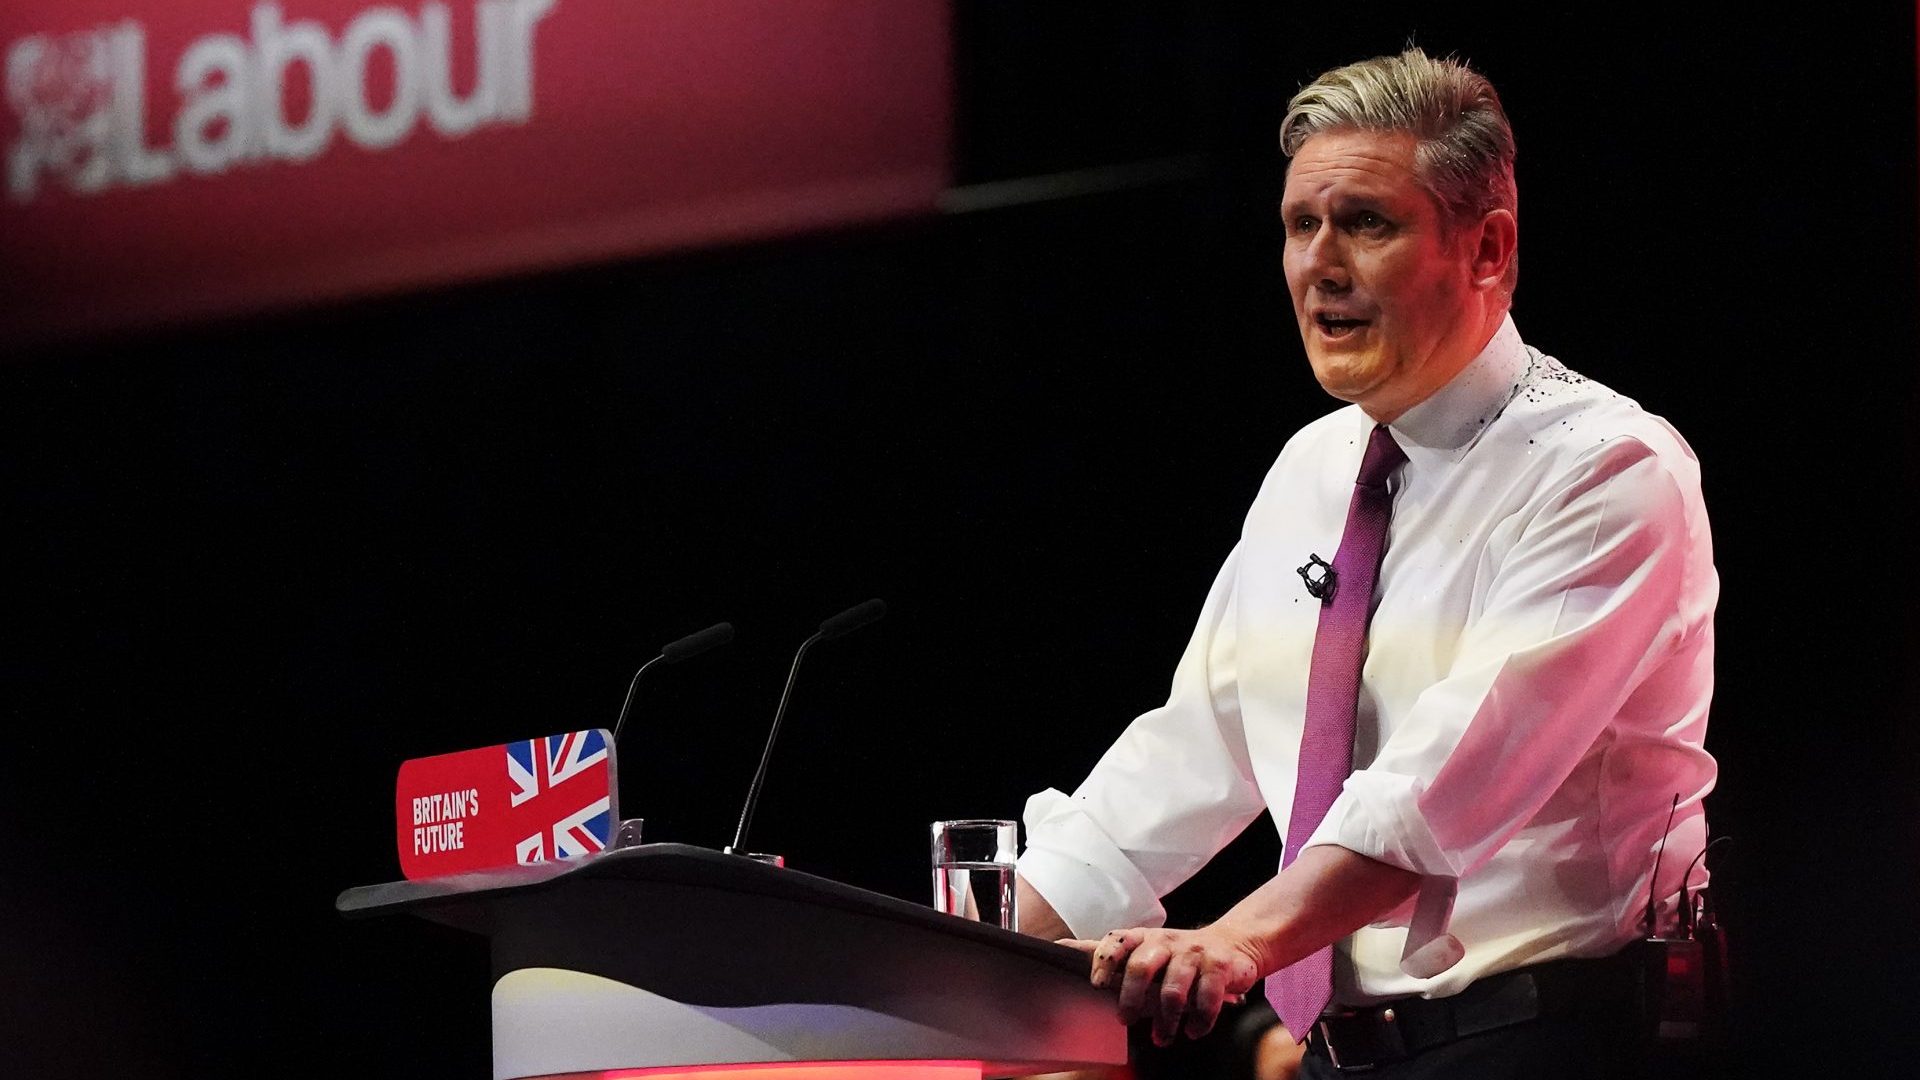 Keir Starmer delivers the leader's speech, covered in glitter after a protestor stormed the stage on the third day of the Labour Party conference (Photo by Ian Forsyth/Getty Images)